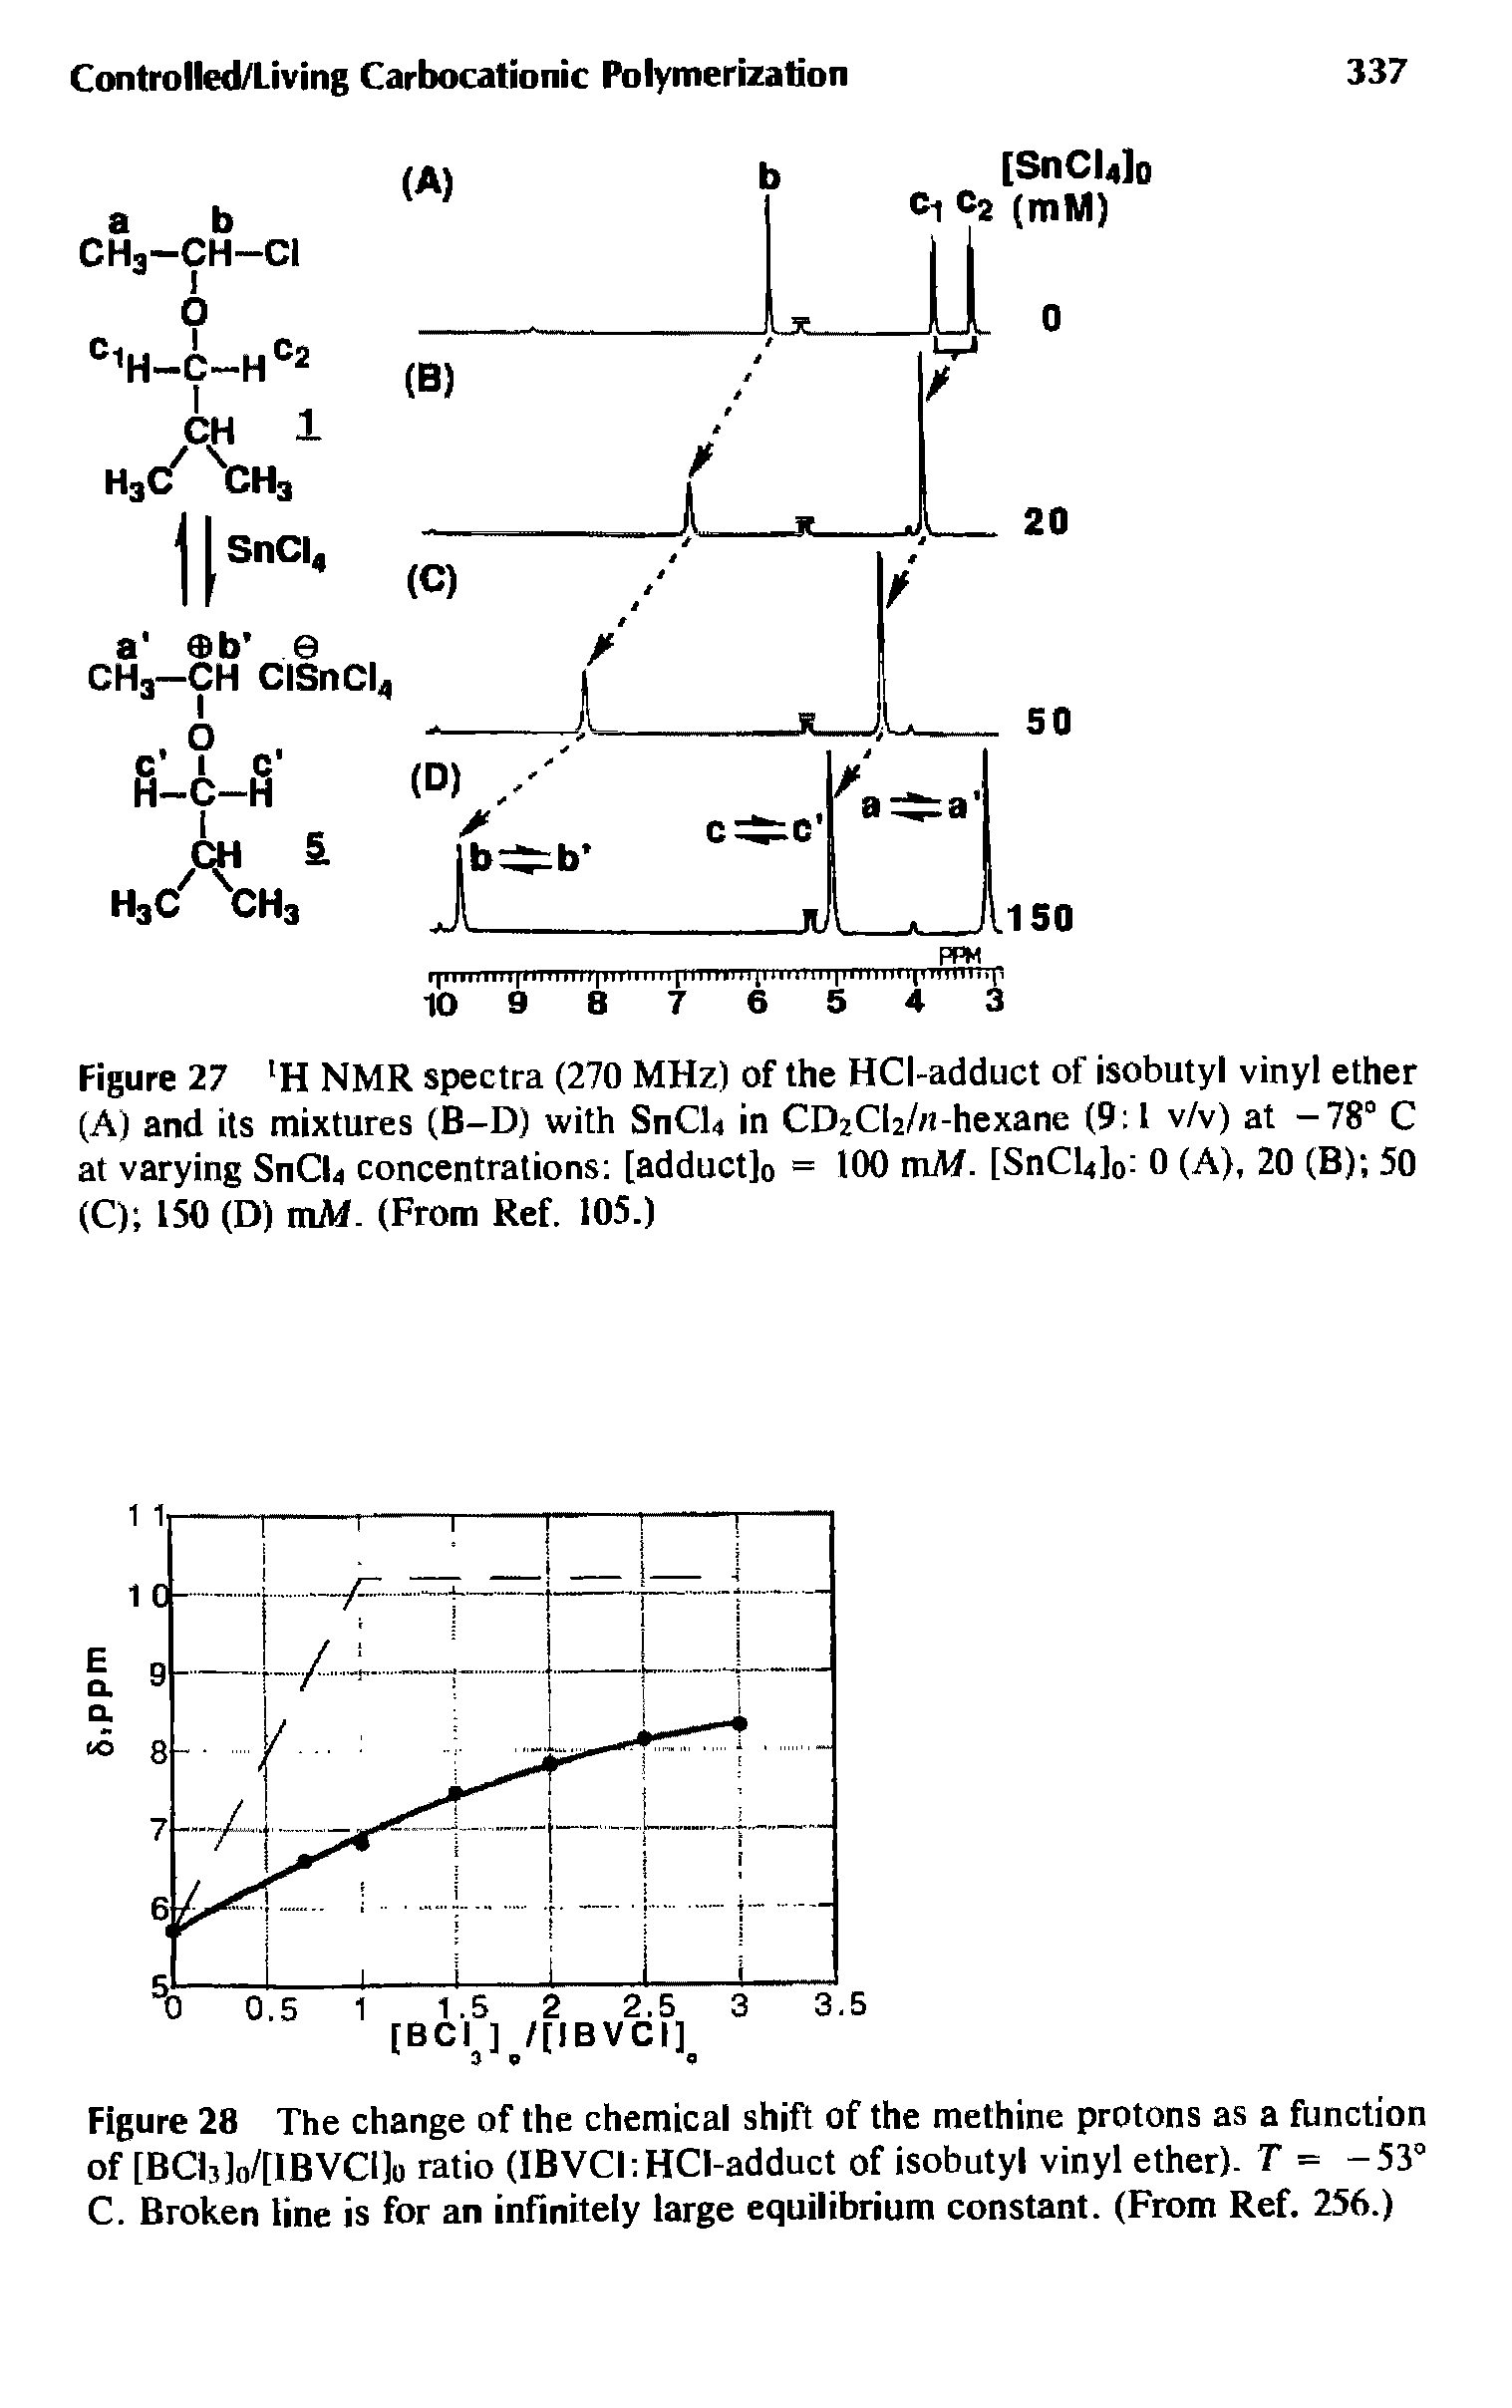 Figure 27 H NMR spectra (270 MHz) of the HCI-adduct of isobutyl vinyl ether (A) and its mixtures (B-D) with SnCU in CDzCU/rt-hexane (9 1 v/v) at -78° C at varying SnCU concentrations [adduct]0 = 100 mM. [SnCl4]0 0 (A), 20 (B) 50 (C) 150 (D) tnAf. (From Ref. 105.)...